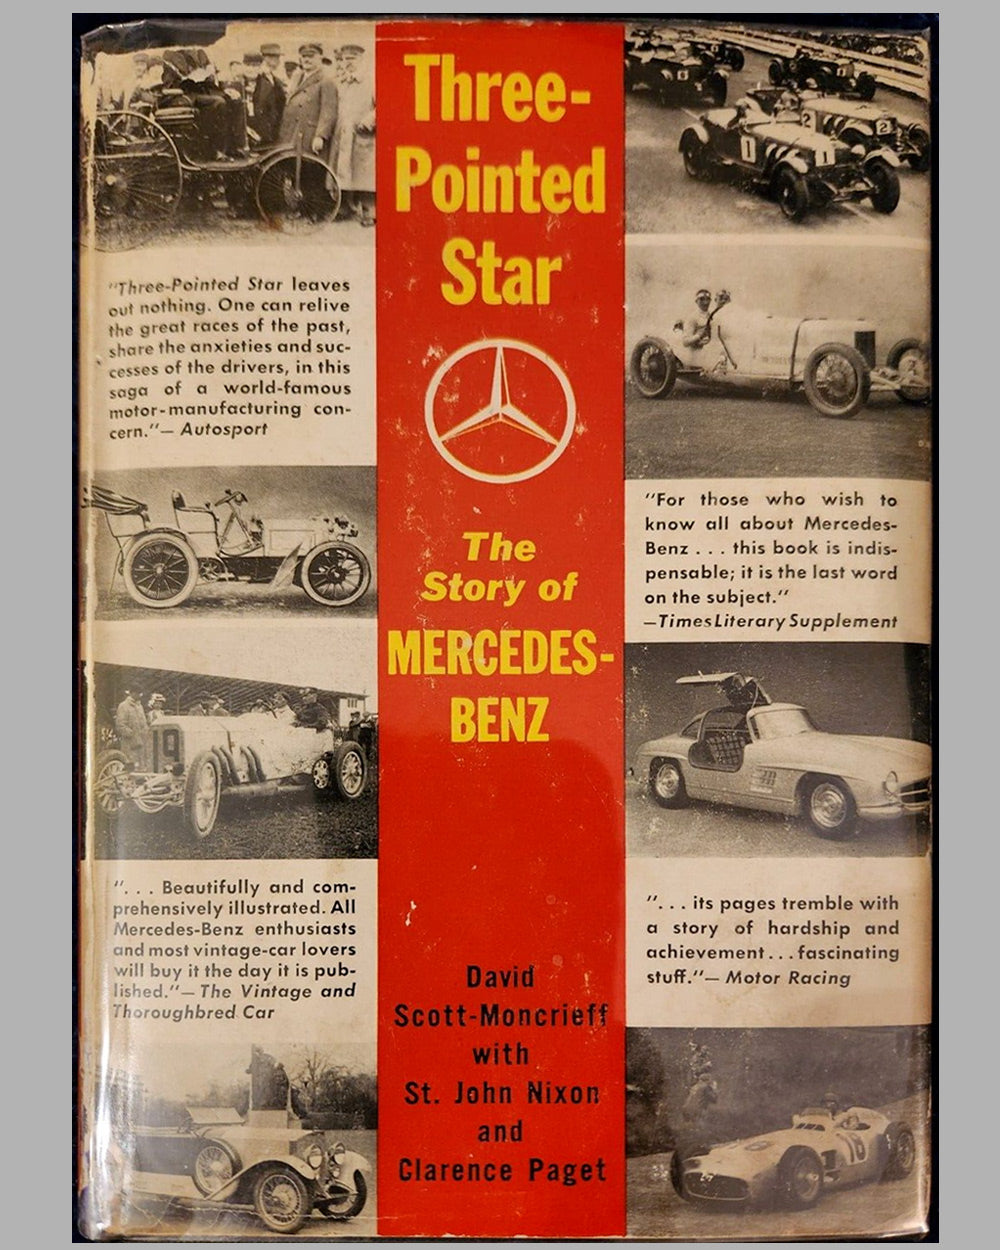 Mercedes Benz Logo Posters for Sale